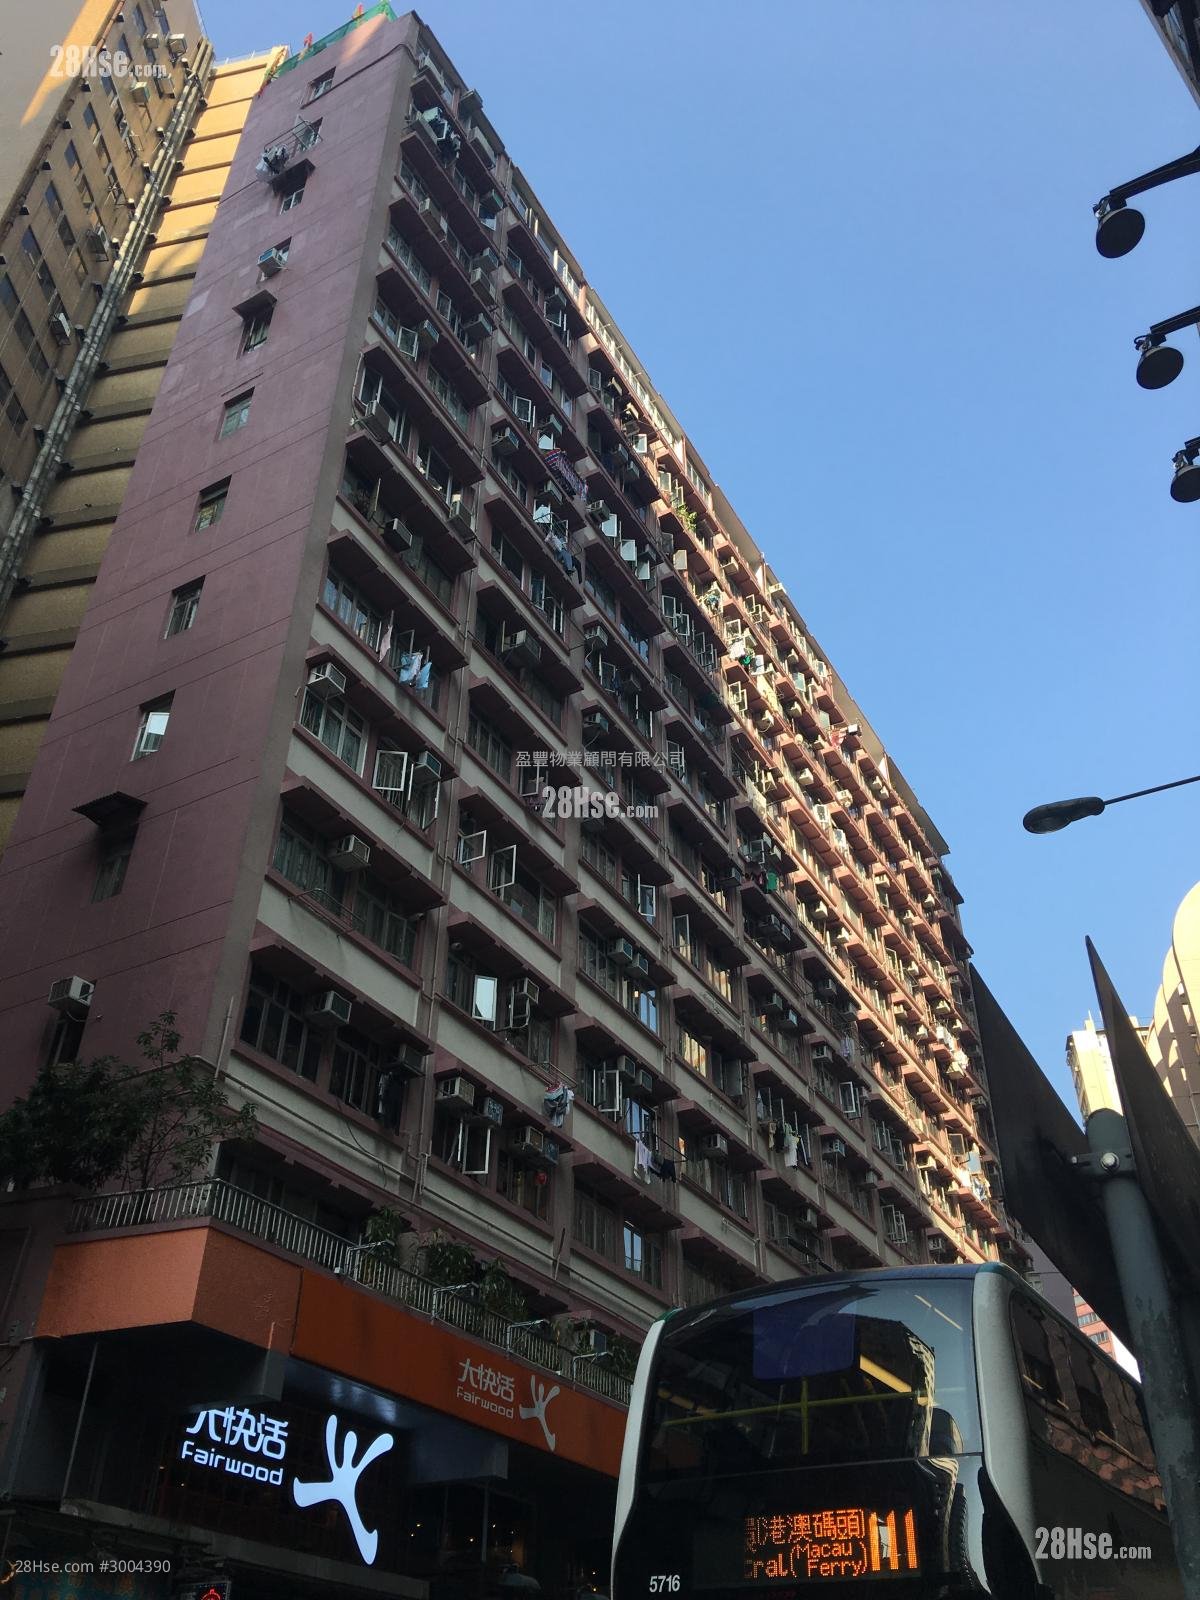 Ming Fung Building Sell 3 bedrooms , 2 bathrooms 570 ft²